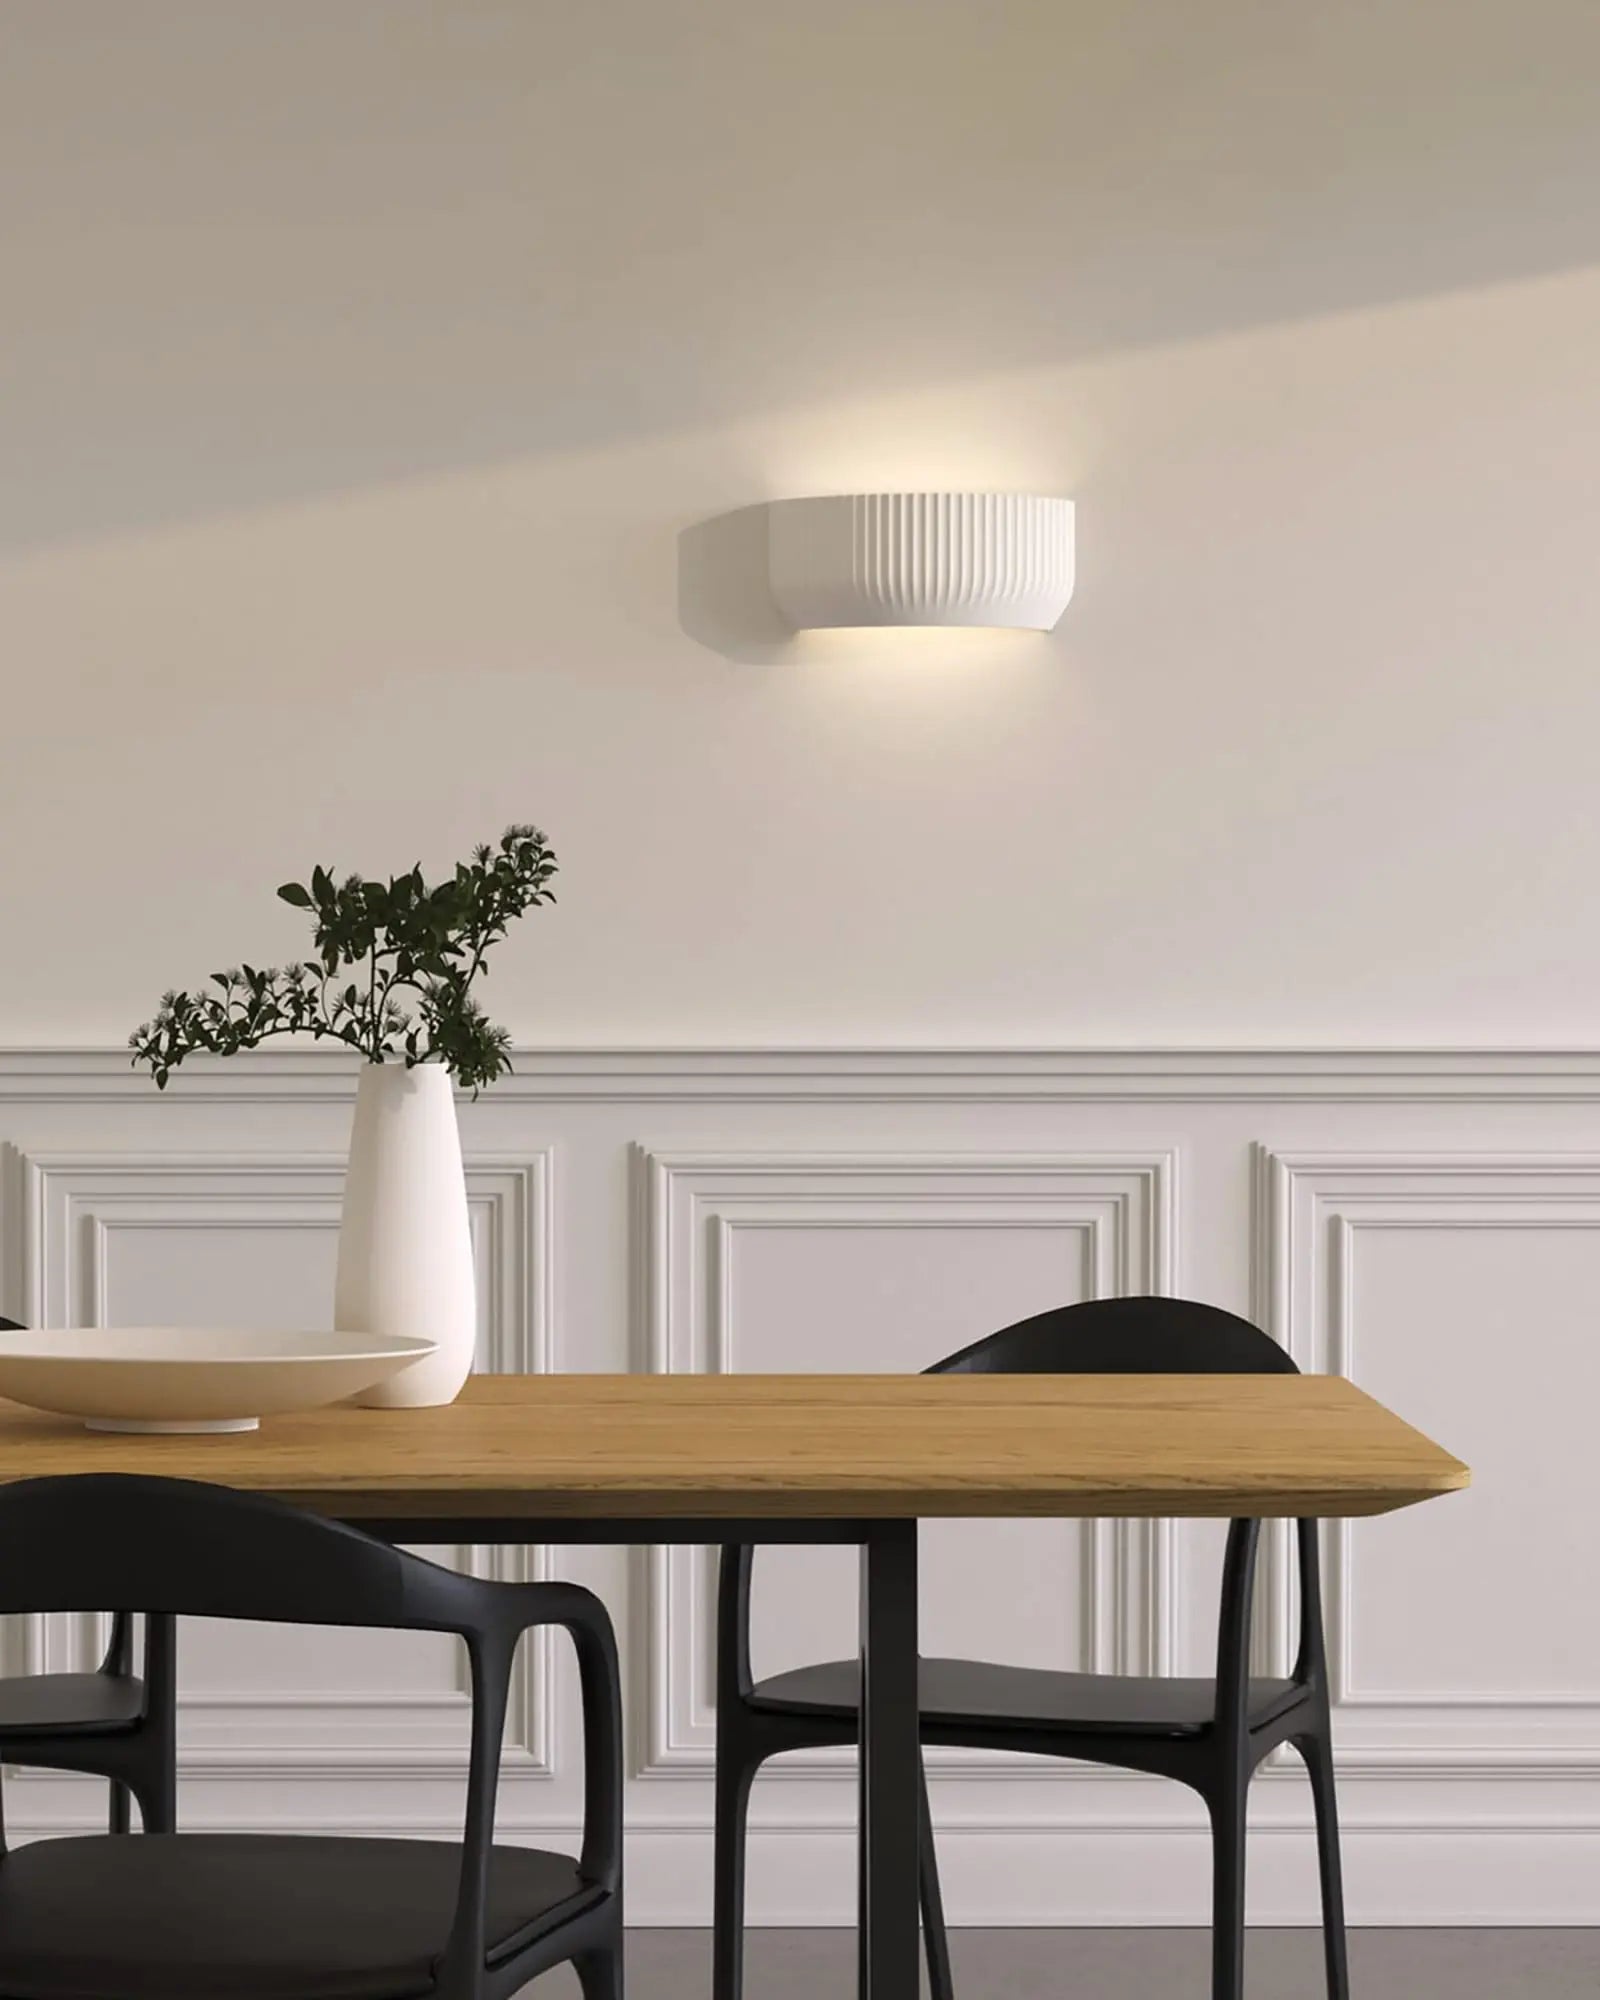 Blend plaster contemporary architectural style wall light behind a dining table